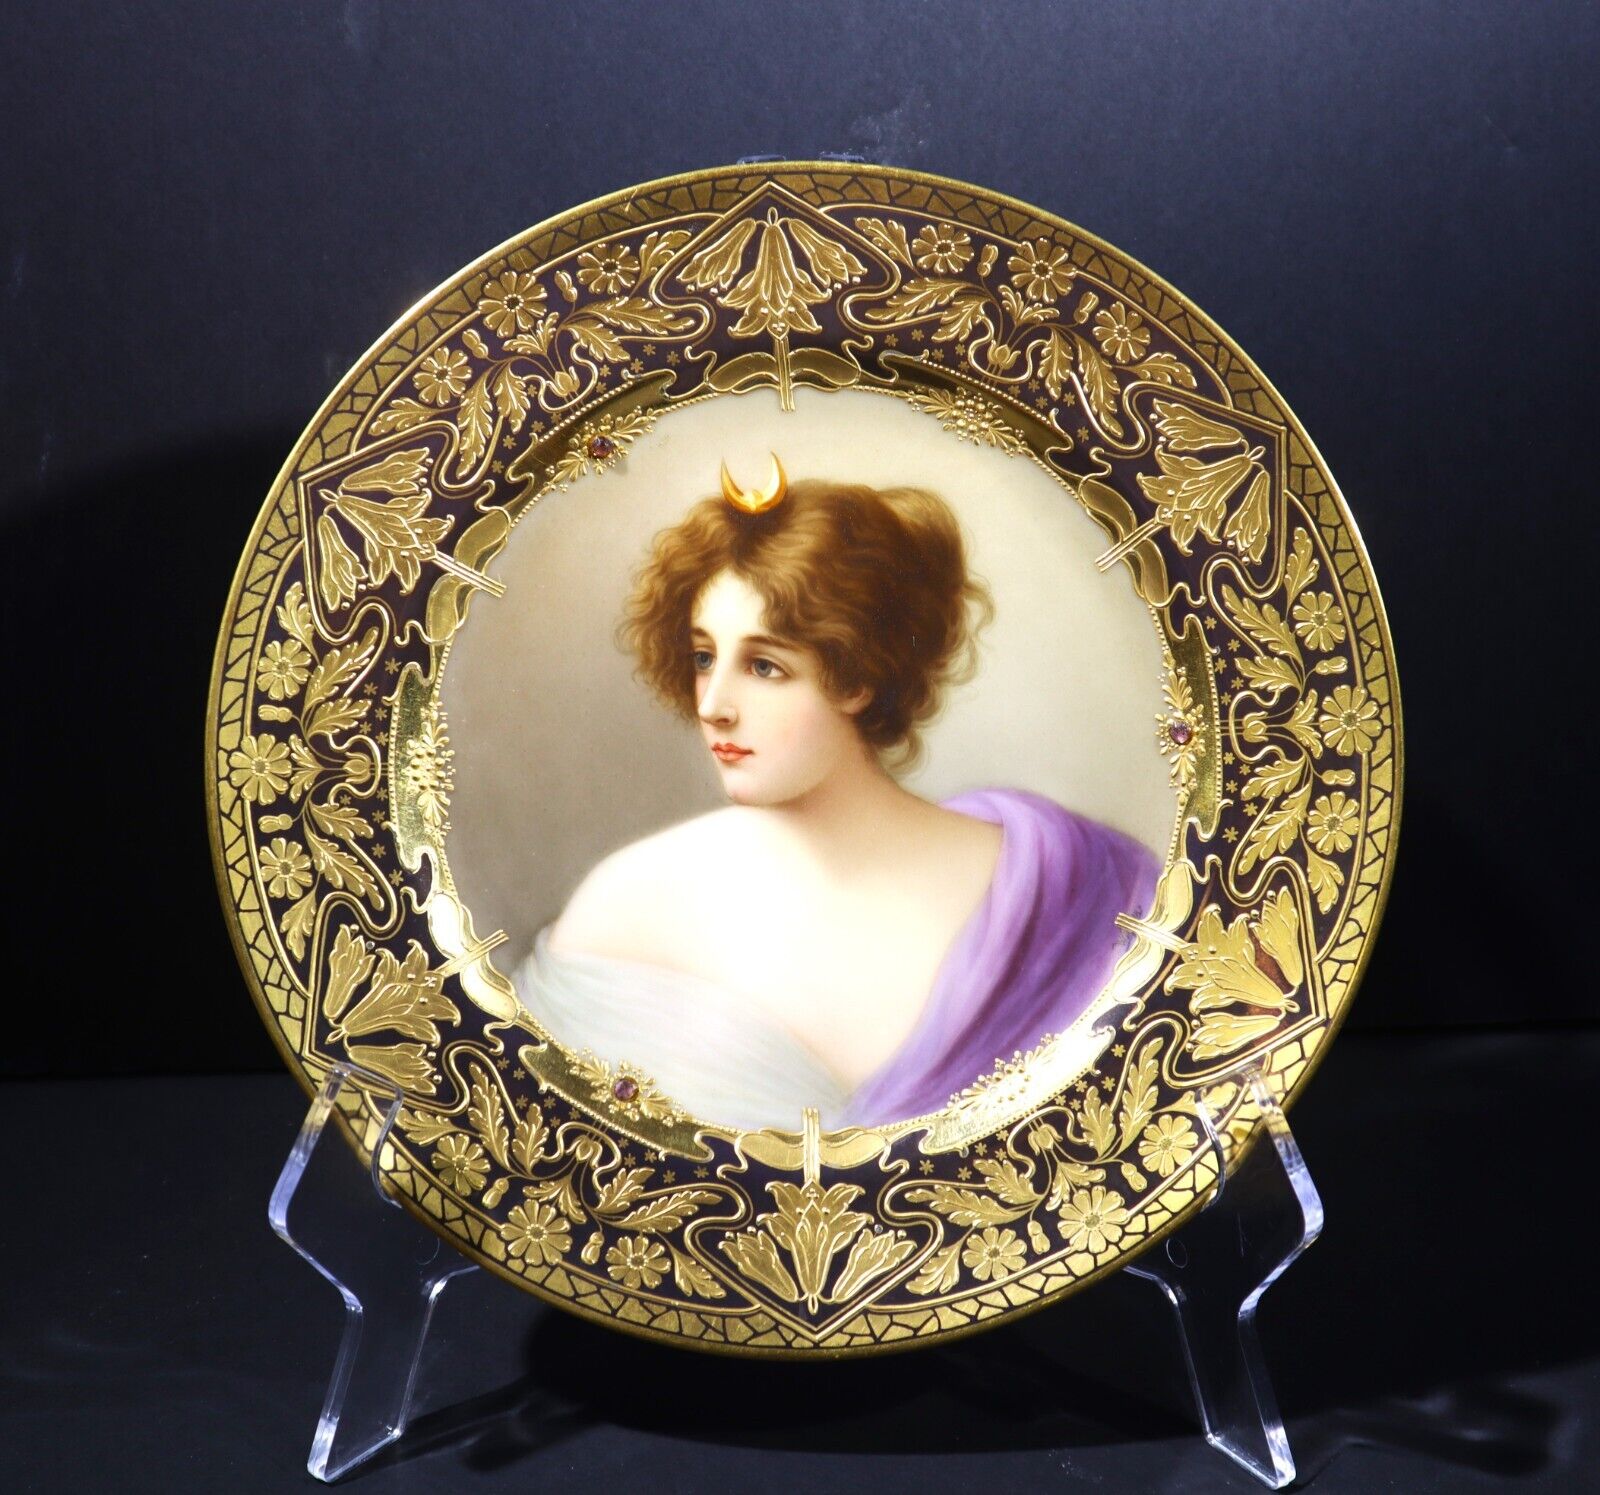 OUTSTANDING 1880s Royal Vienna Portrait Plate DIANA w/ AMETHYST JEWELS  WAGNER